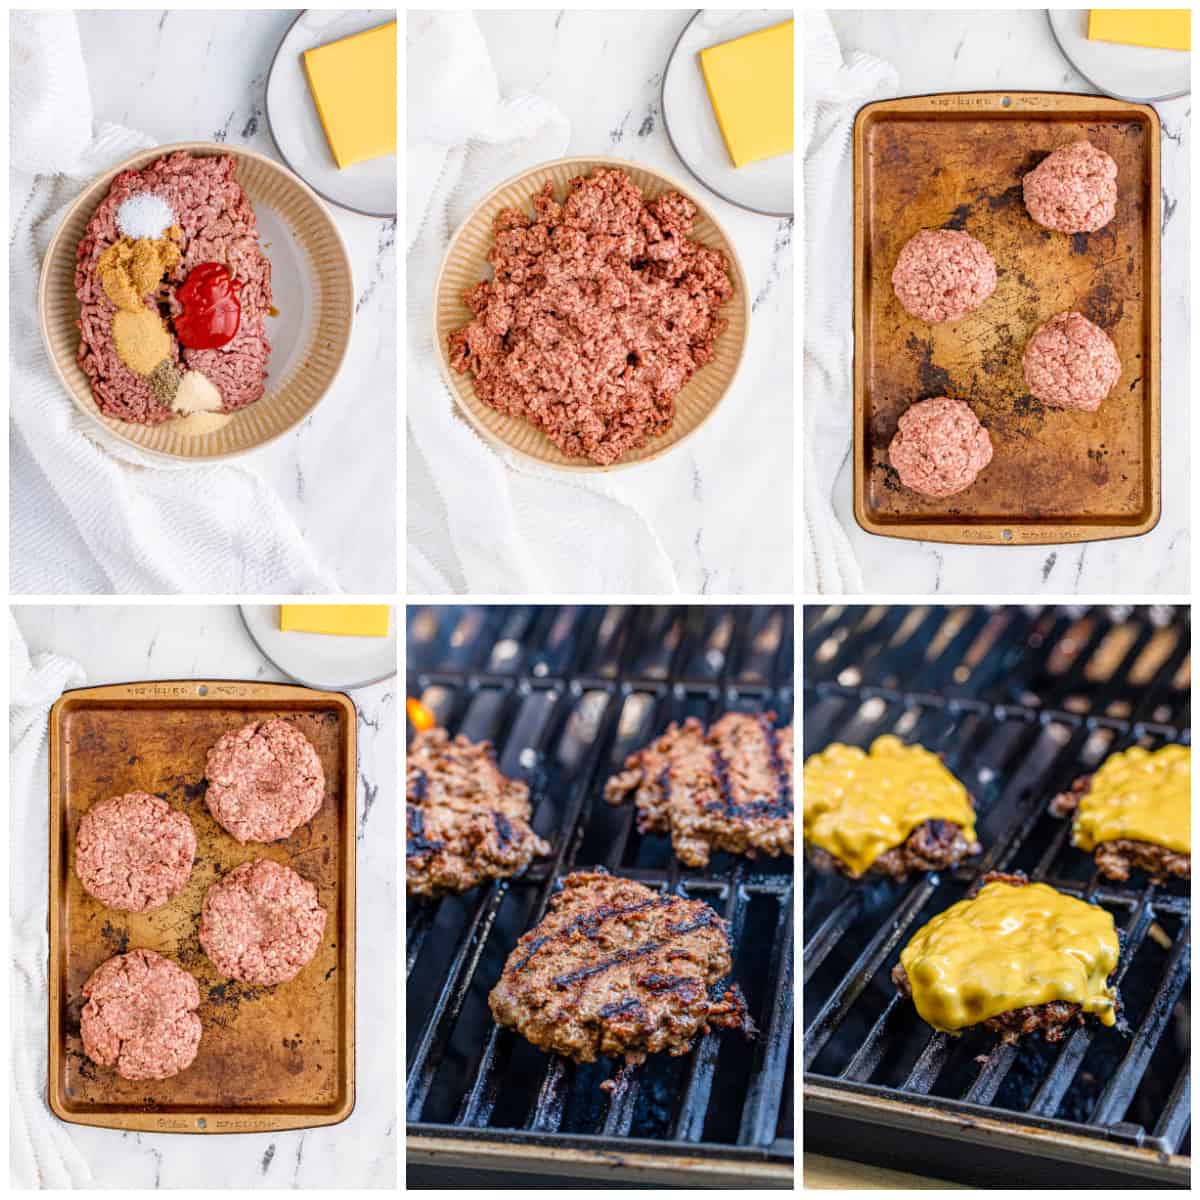 Step by step photos on how to make a Cheeseburger Recipe.